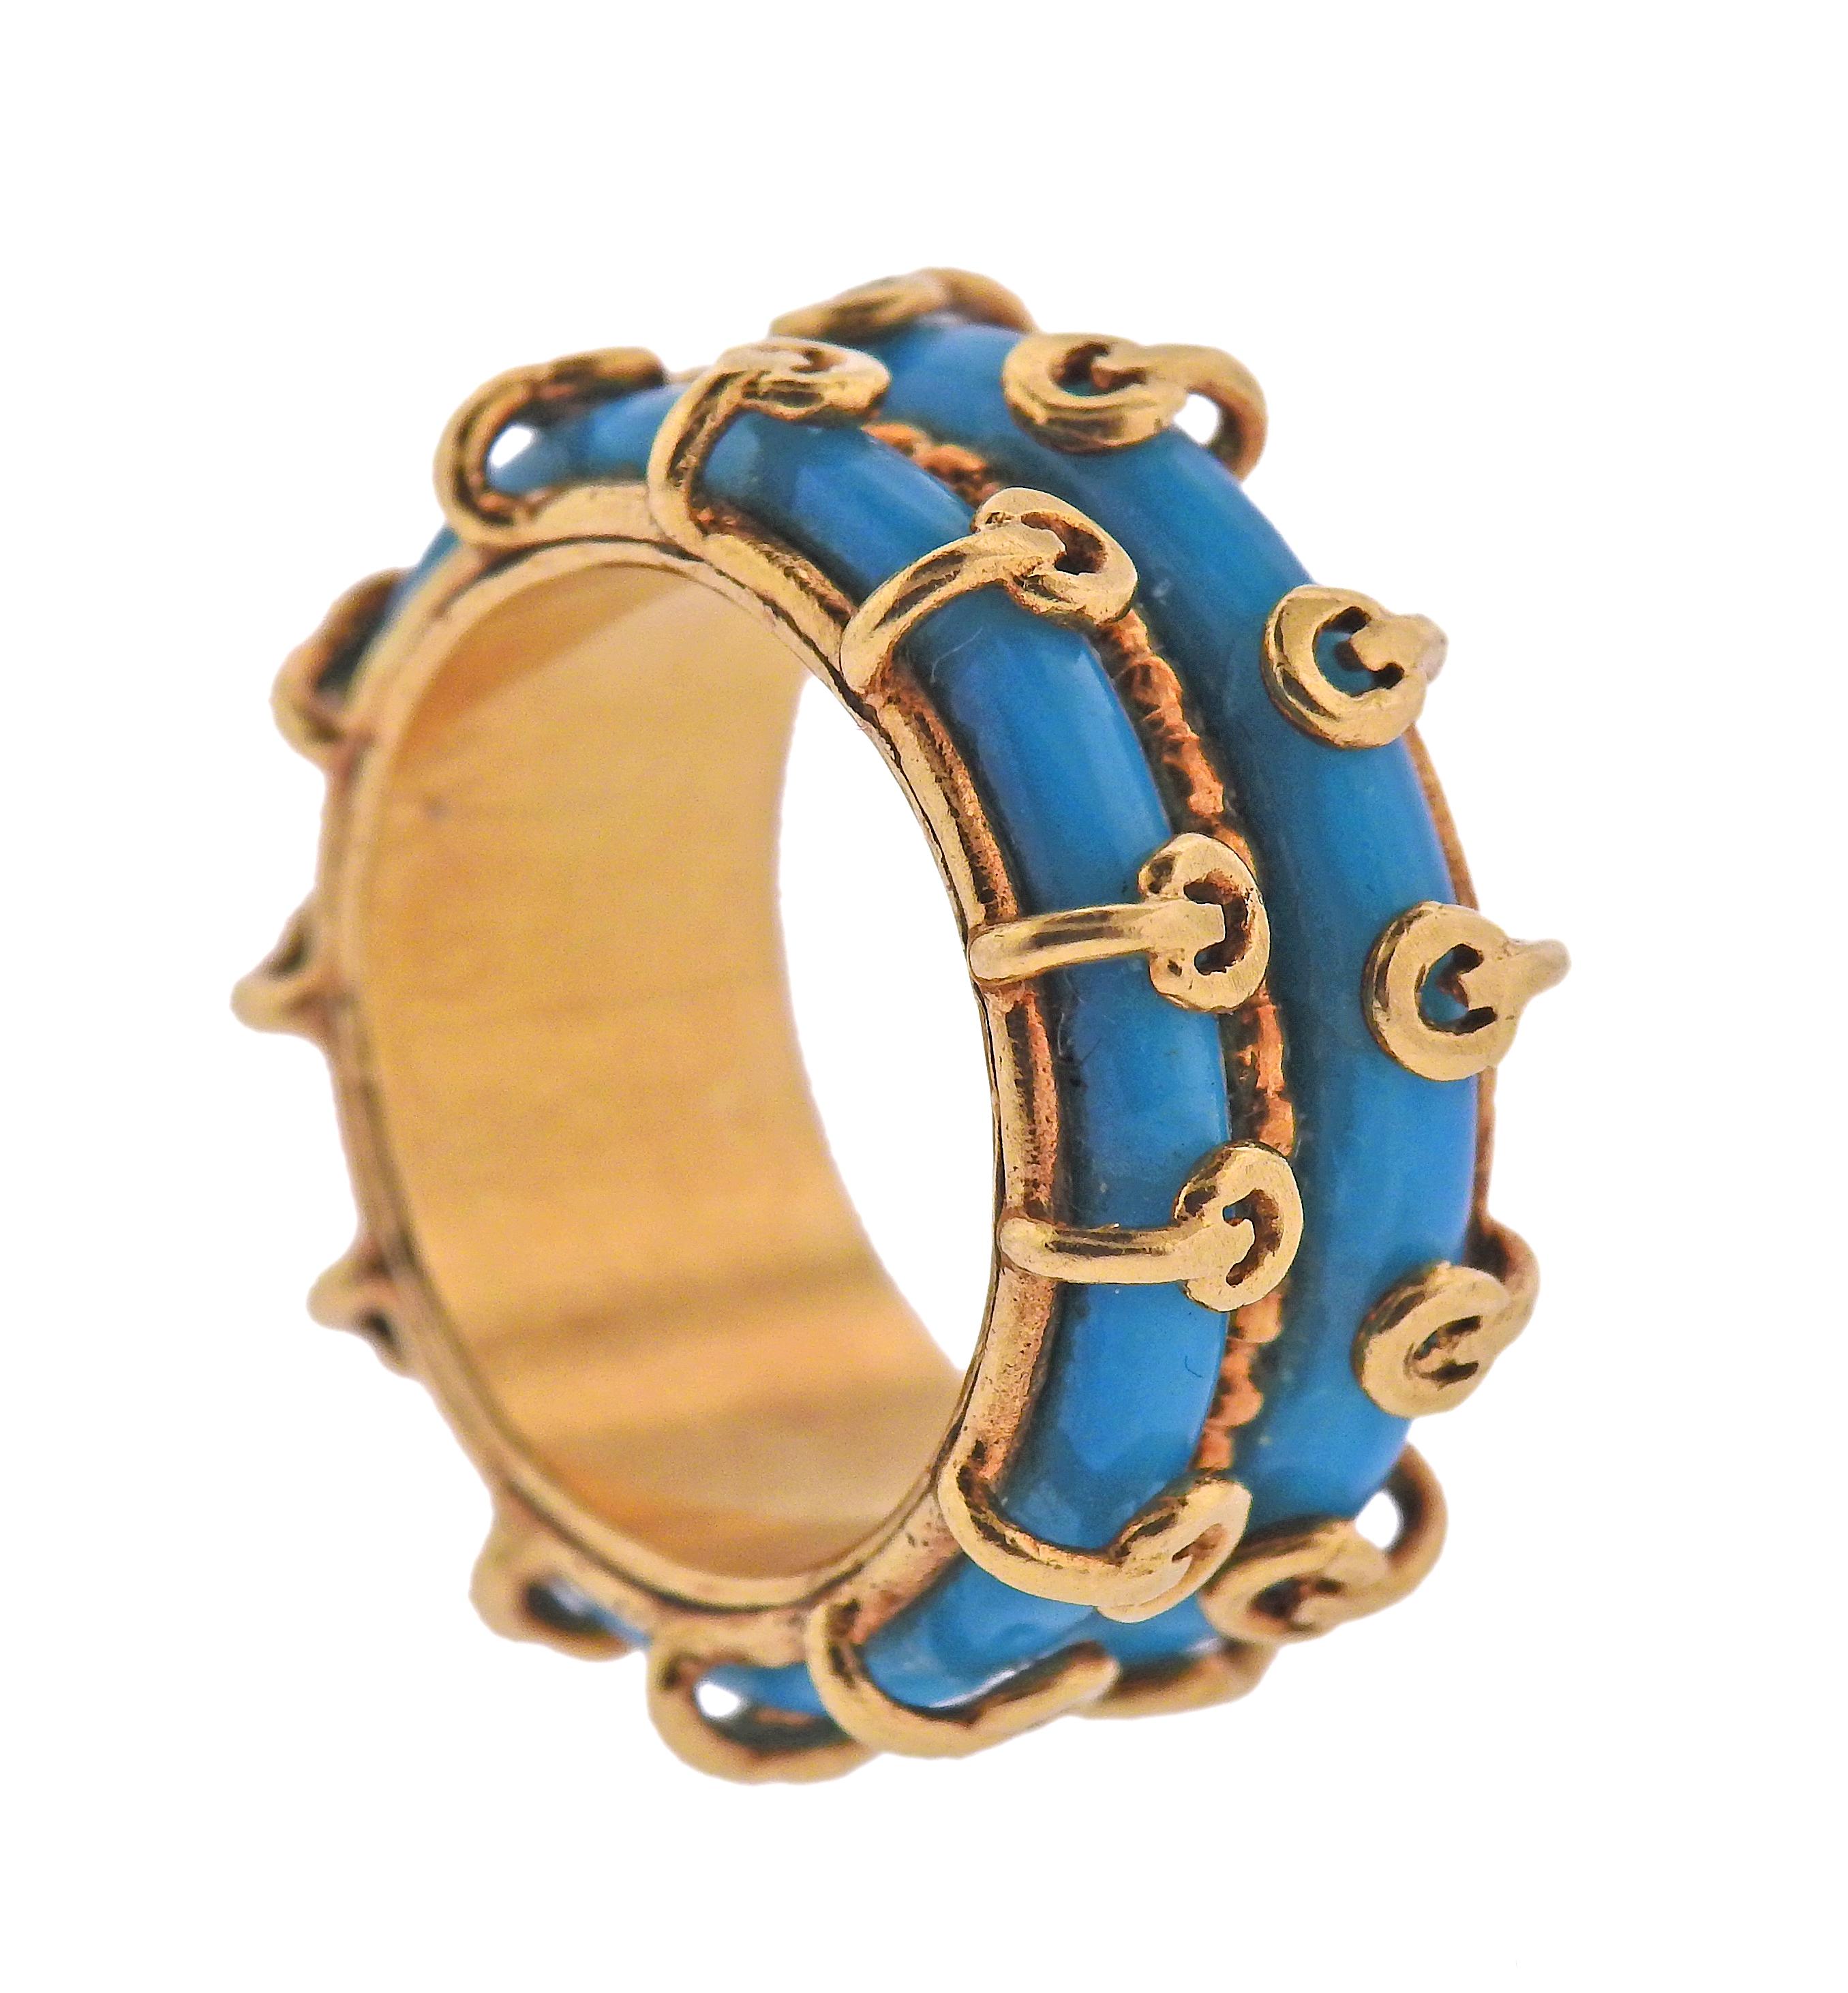 18k gold double row turquoise band ring by Zolotas of Greece. Ring size 5, ring is 11mm wide. Marked: L47, Z, 750. Weight of the piece - 9.3 grams. 